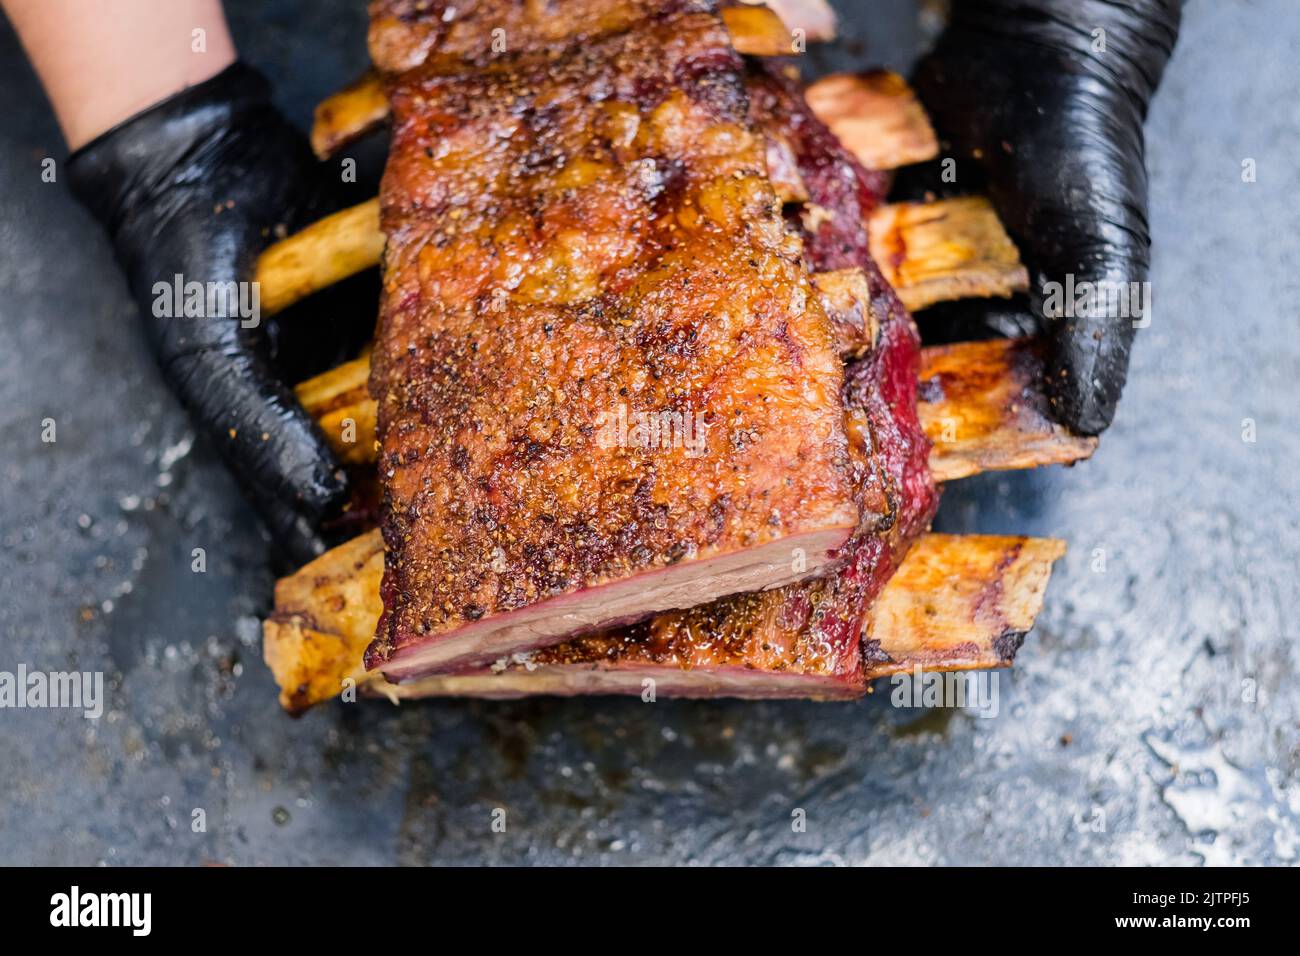 grill restaurant kitchen chef smoked beef ribs Stock Photo